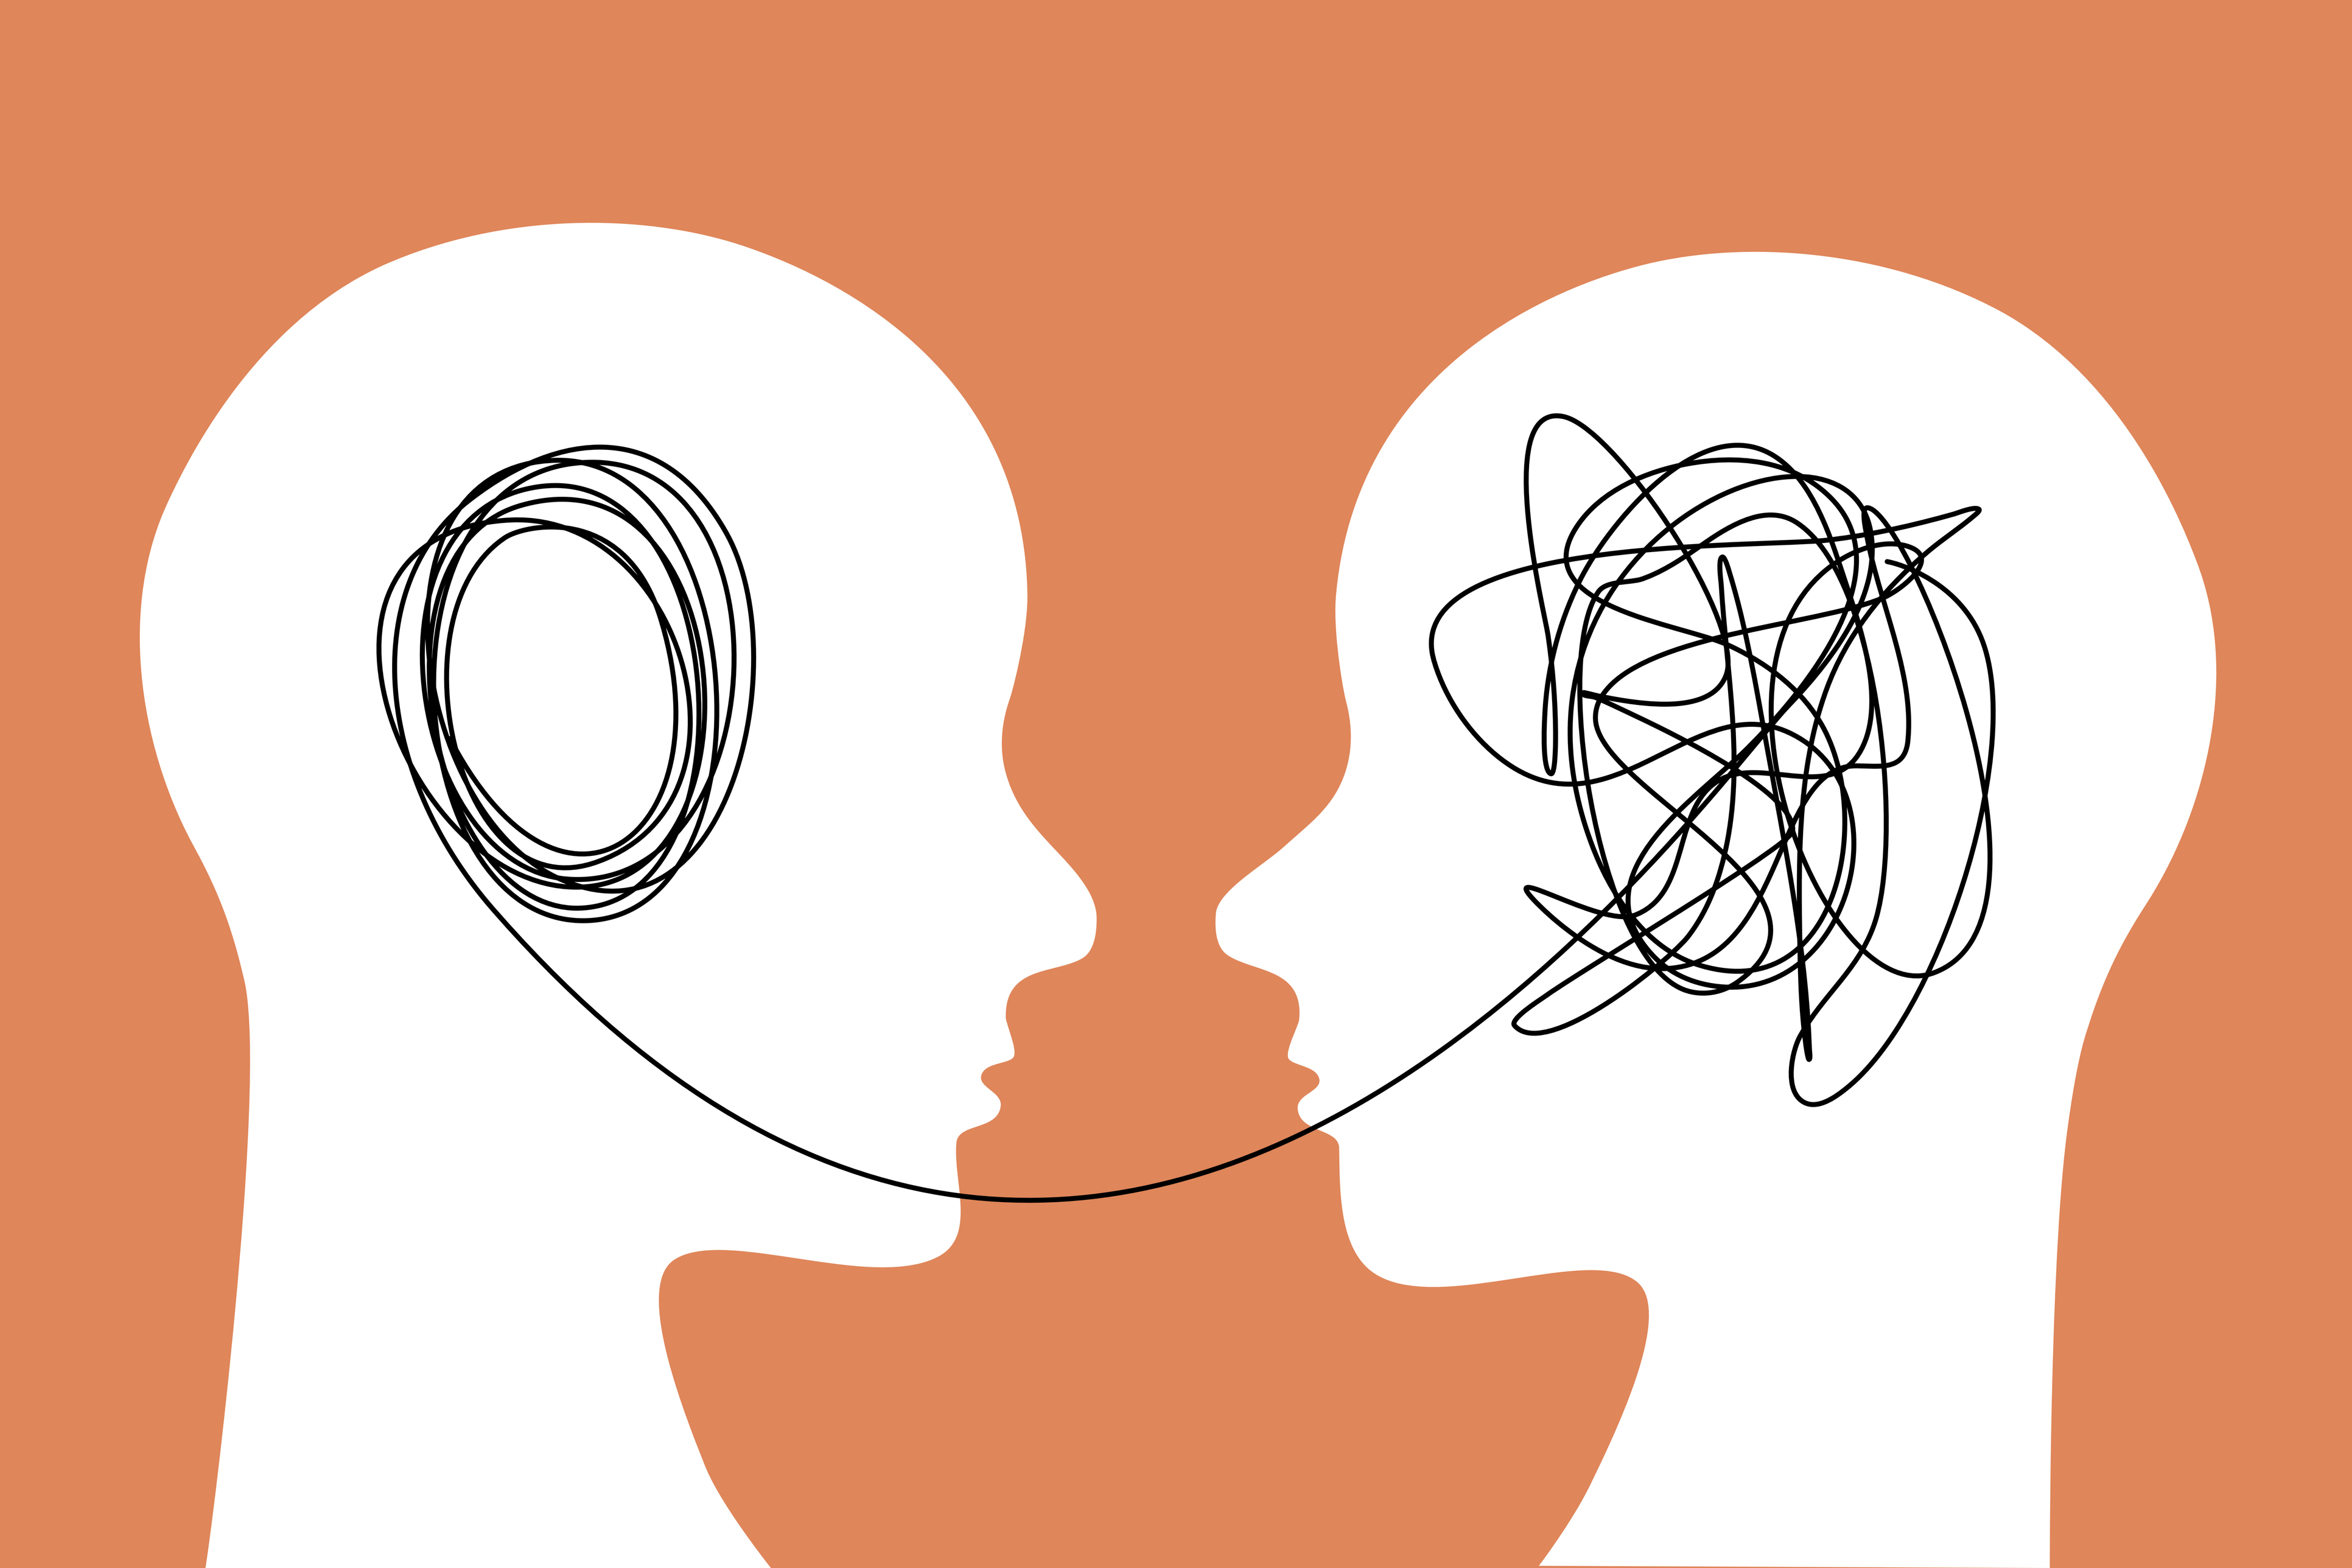 Illustration shows two silhouettes of heads in profile against an orange background. They are connected by a long piece of thread. The figure on the left has a neat spiral of thread and the figure on the left has a knotted piece of thread.